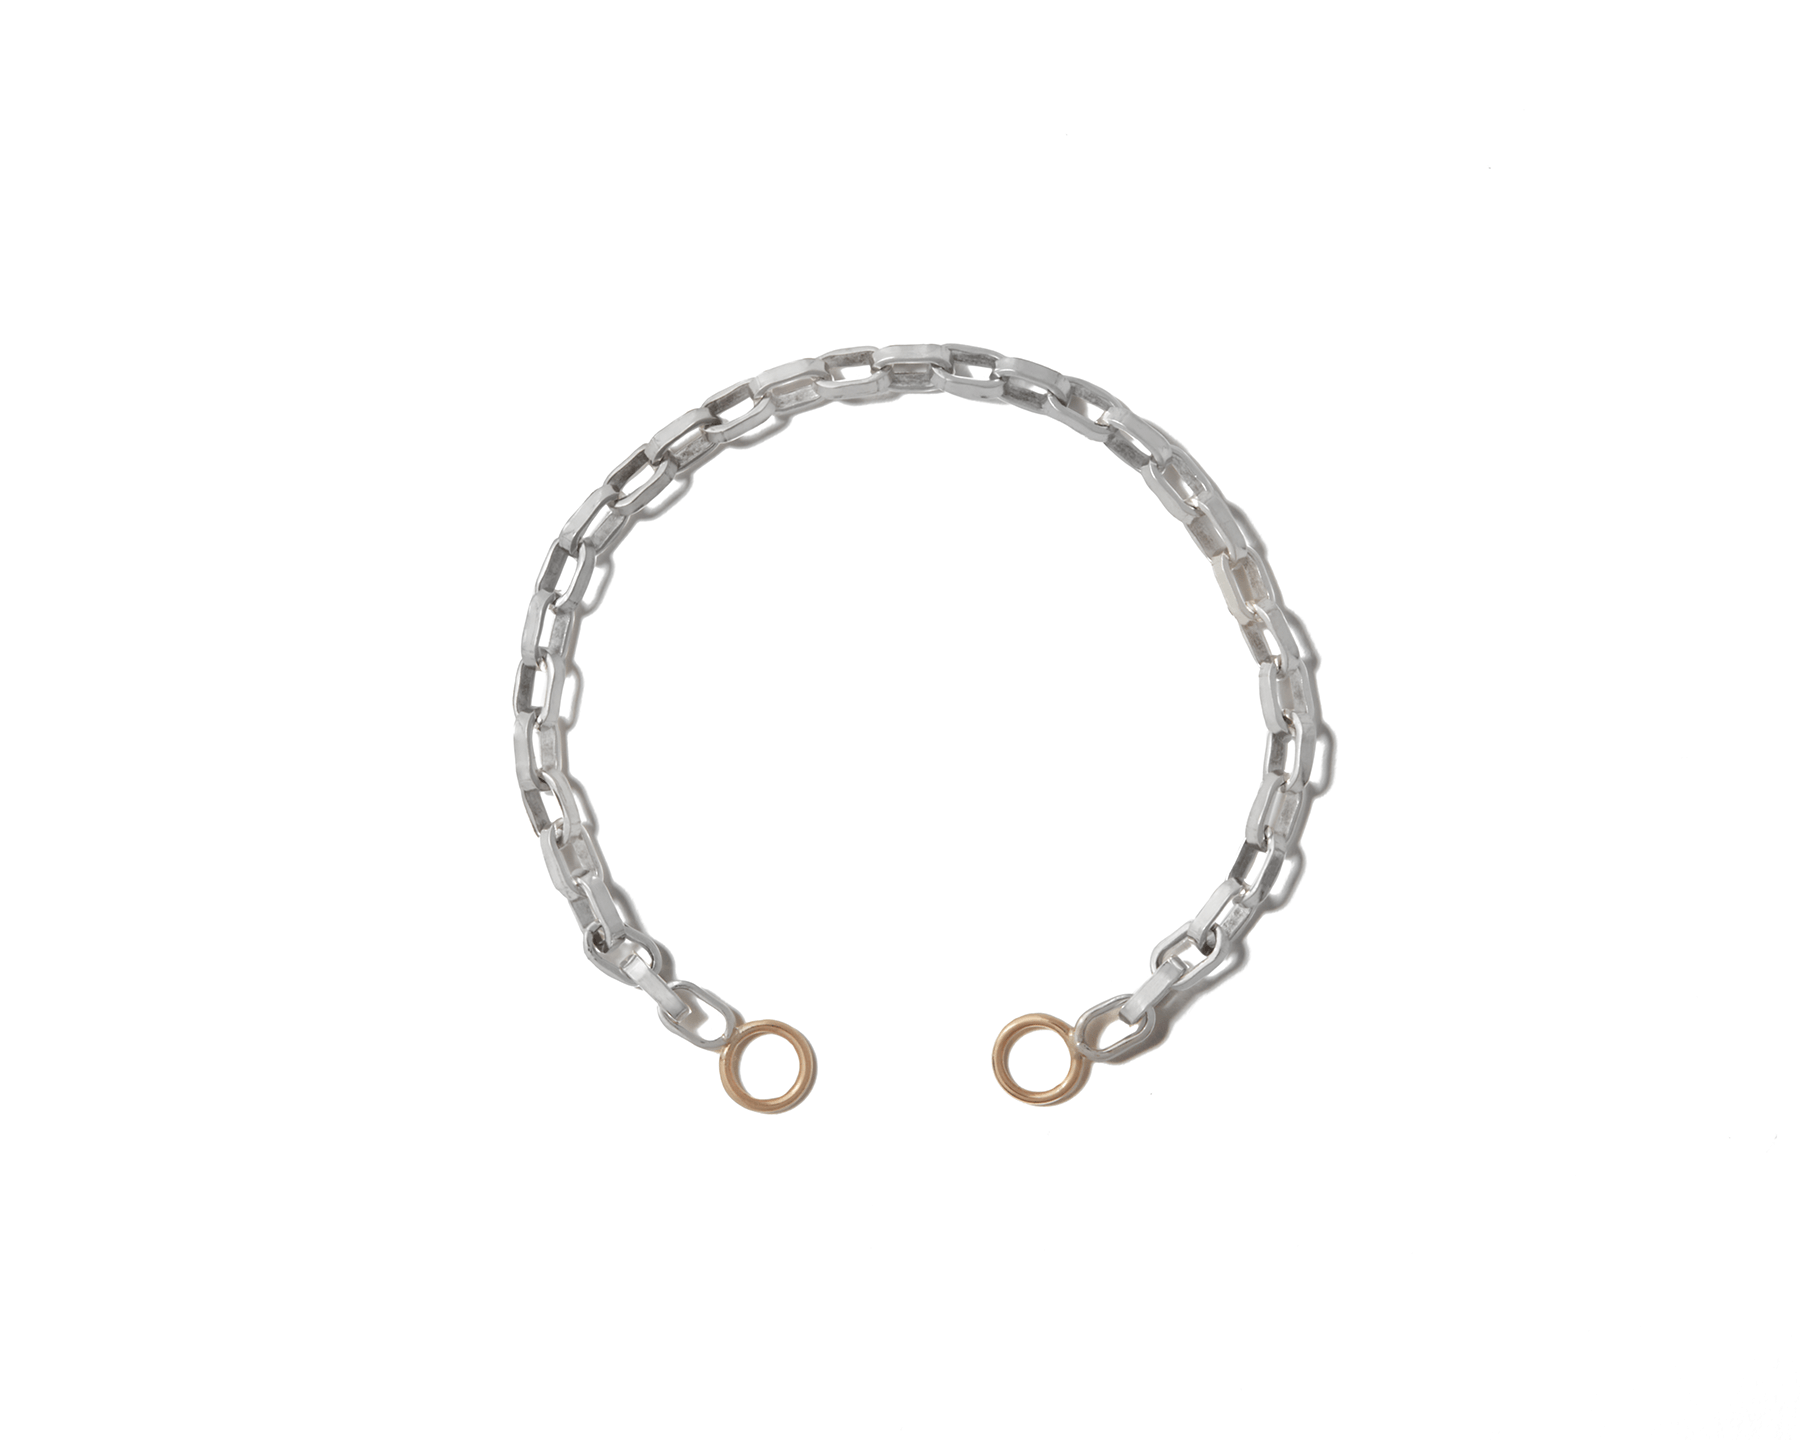 Silver biker chain bracelet with gold loops